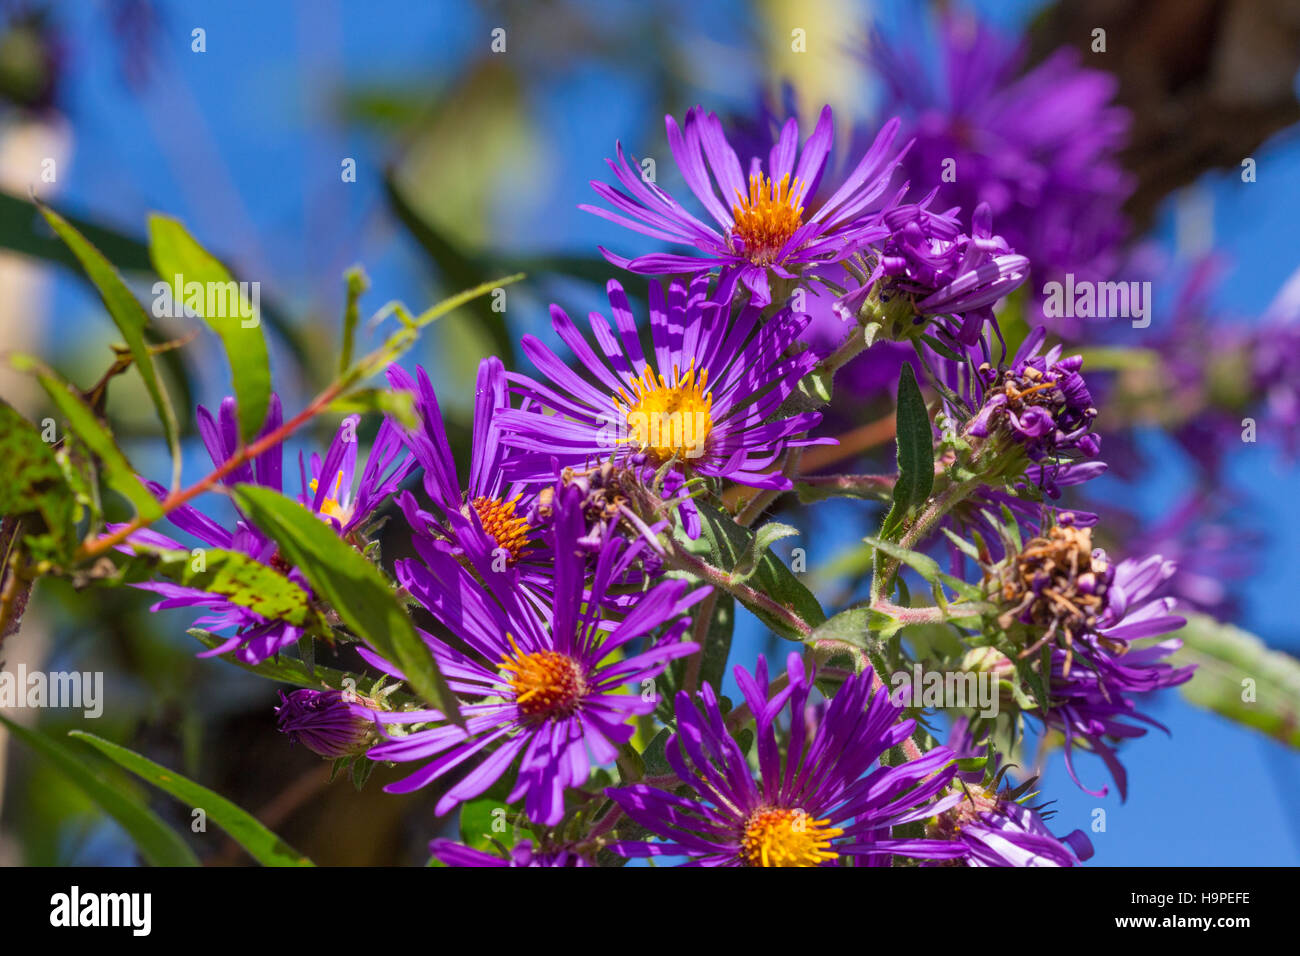 Bright purple New England asters (Symphyotrichum novae-angliae) blooming against the sky, Indiana, United States Stock Photo